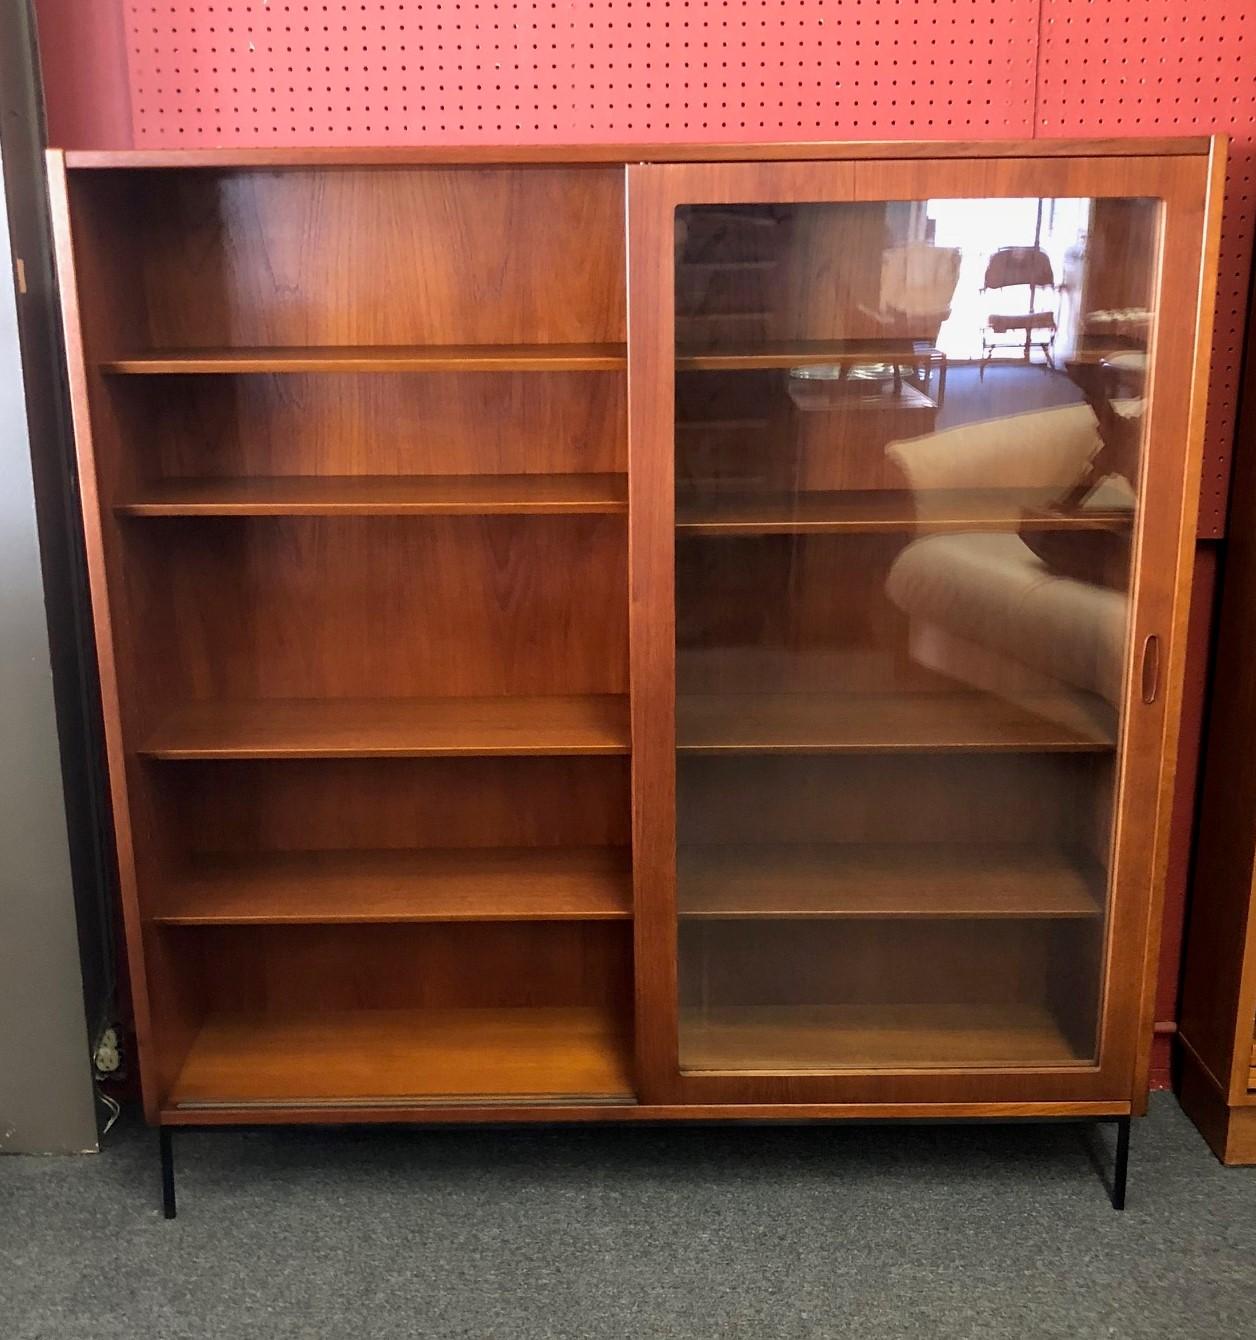 Large and versatile Danish modern teak bookcase, circa 1960s. The piece has adjustable beveled edge wood shelves with double sliding glass doors and sits on a solid iron base. It is a substantial high quality piece made in Denmark and measuring